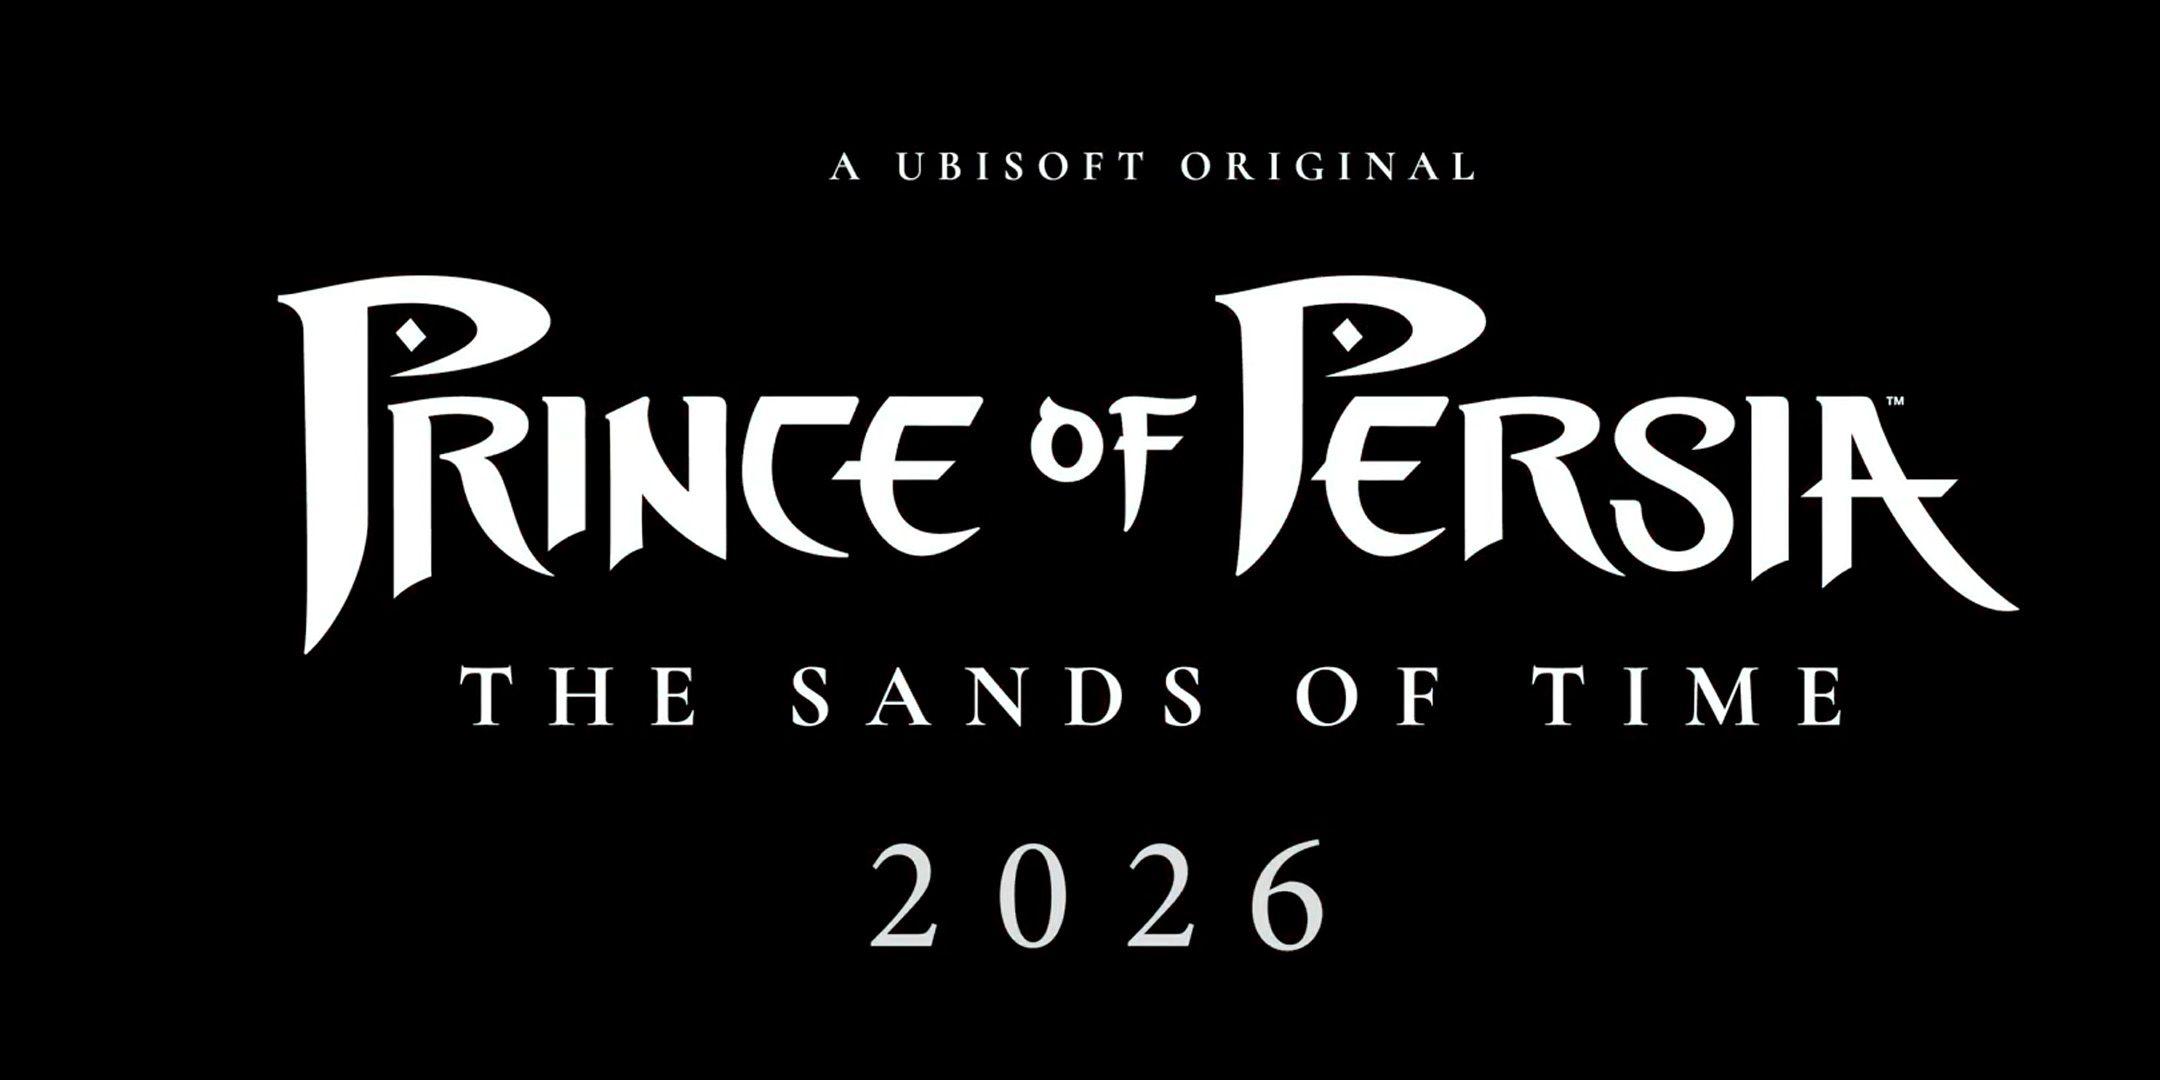 Prince-of-Persia-The-Sands-of-Time-Teaser-Trailer 